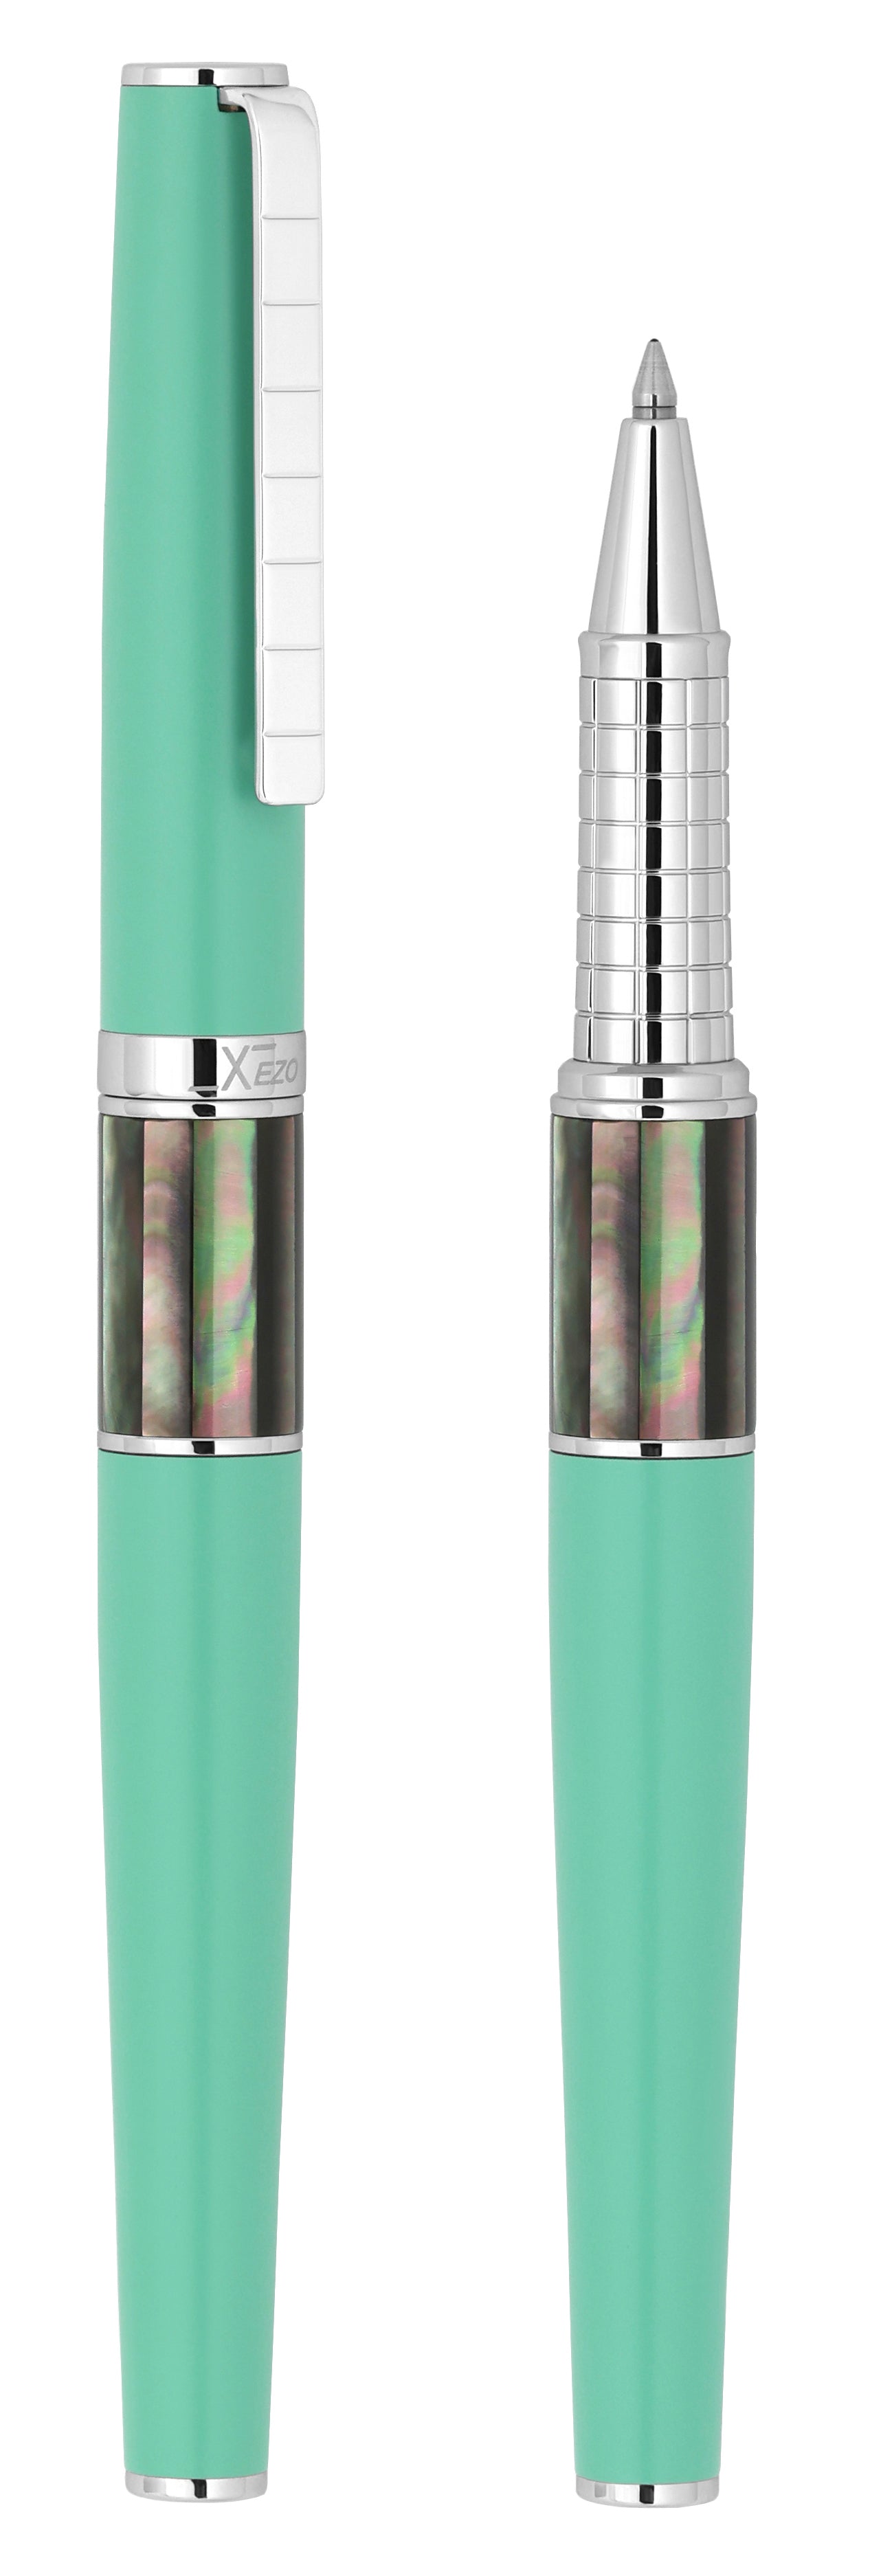 Xezo - Vertical view of two Speed Master Aqua Green R-BC Rollerball pens; the one on the left is capped, and the one on the right is uncapped